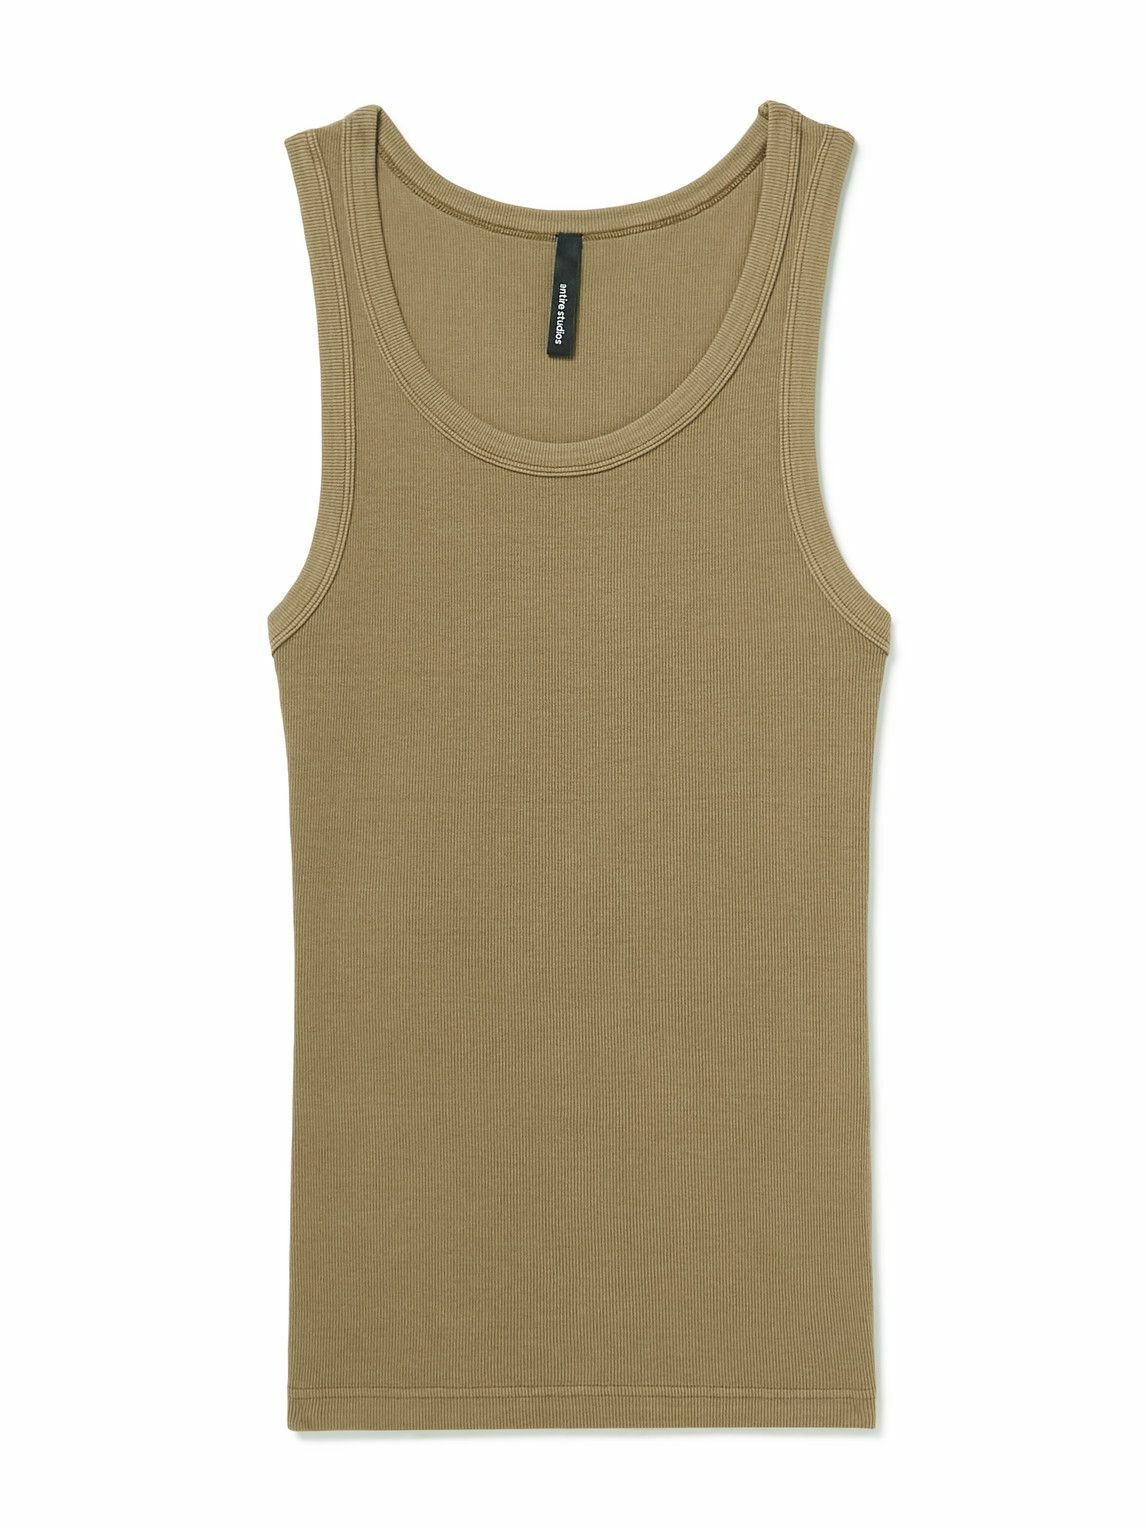 Entire Studios - Garment-Dyed Ribbed Stretch Cotton-Jersey Tank Top -  Neutrals Entire Studios